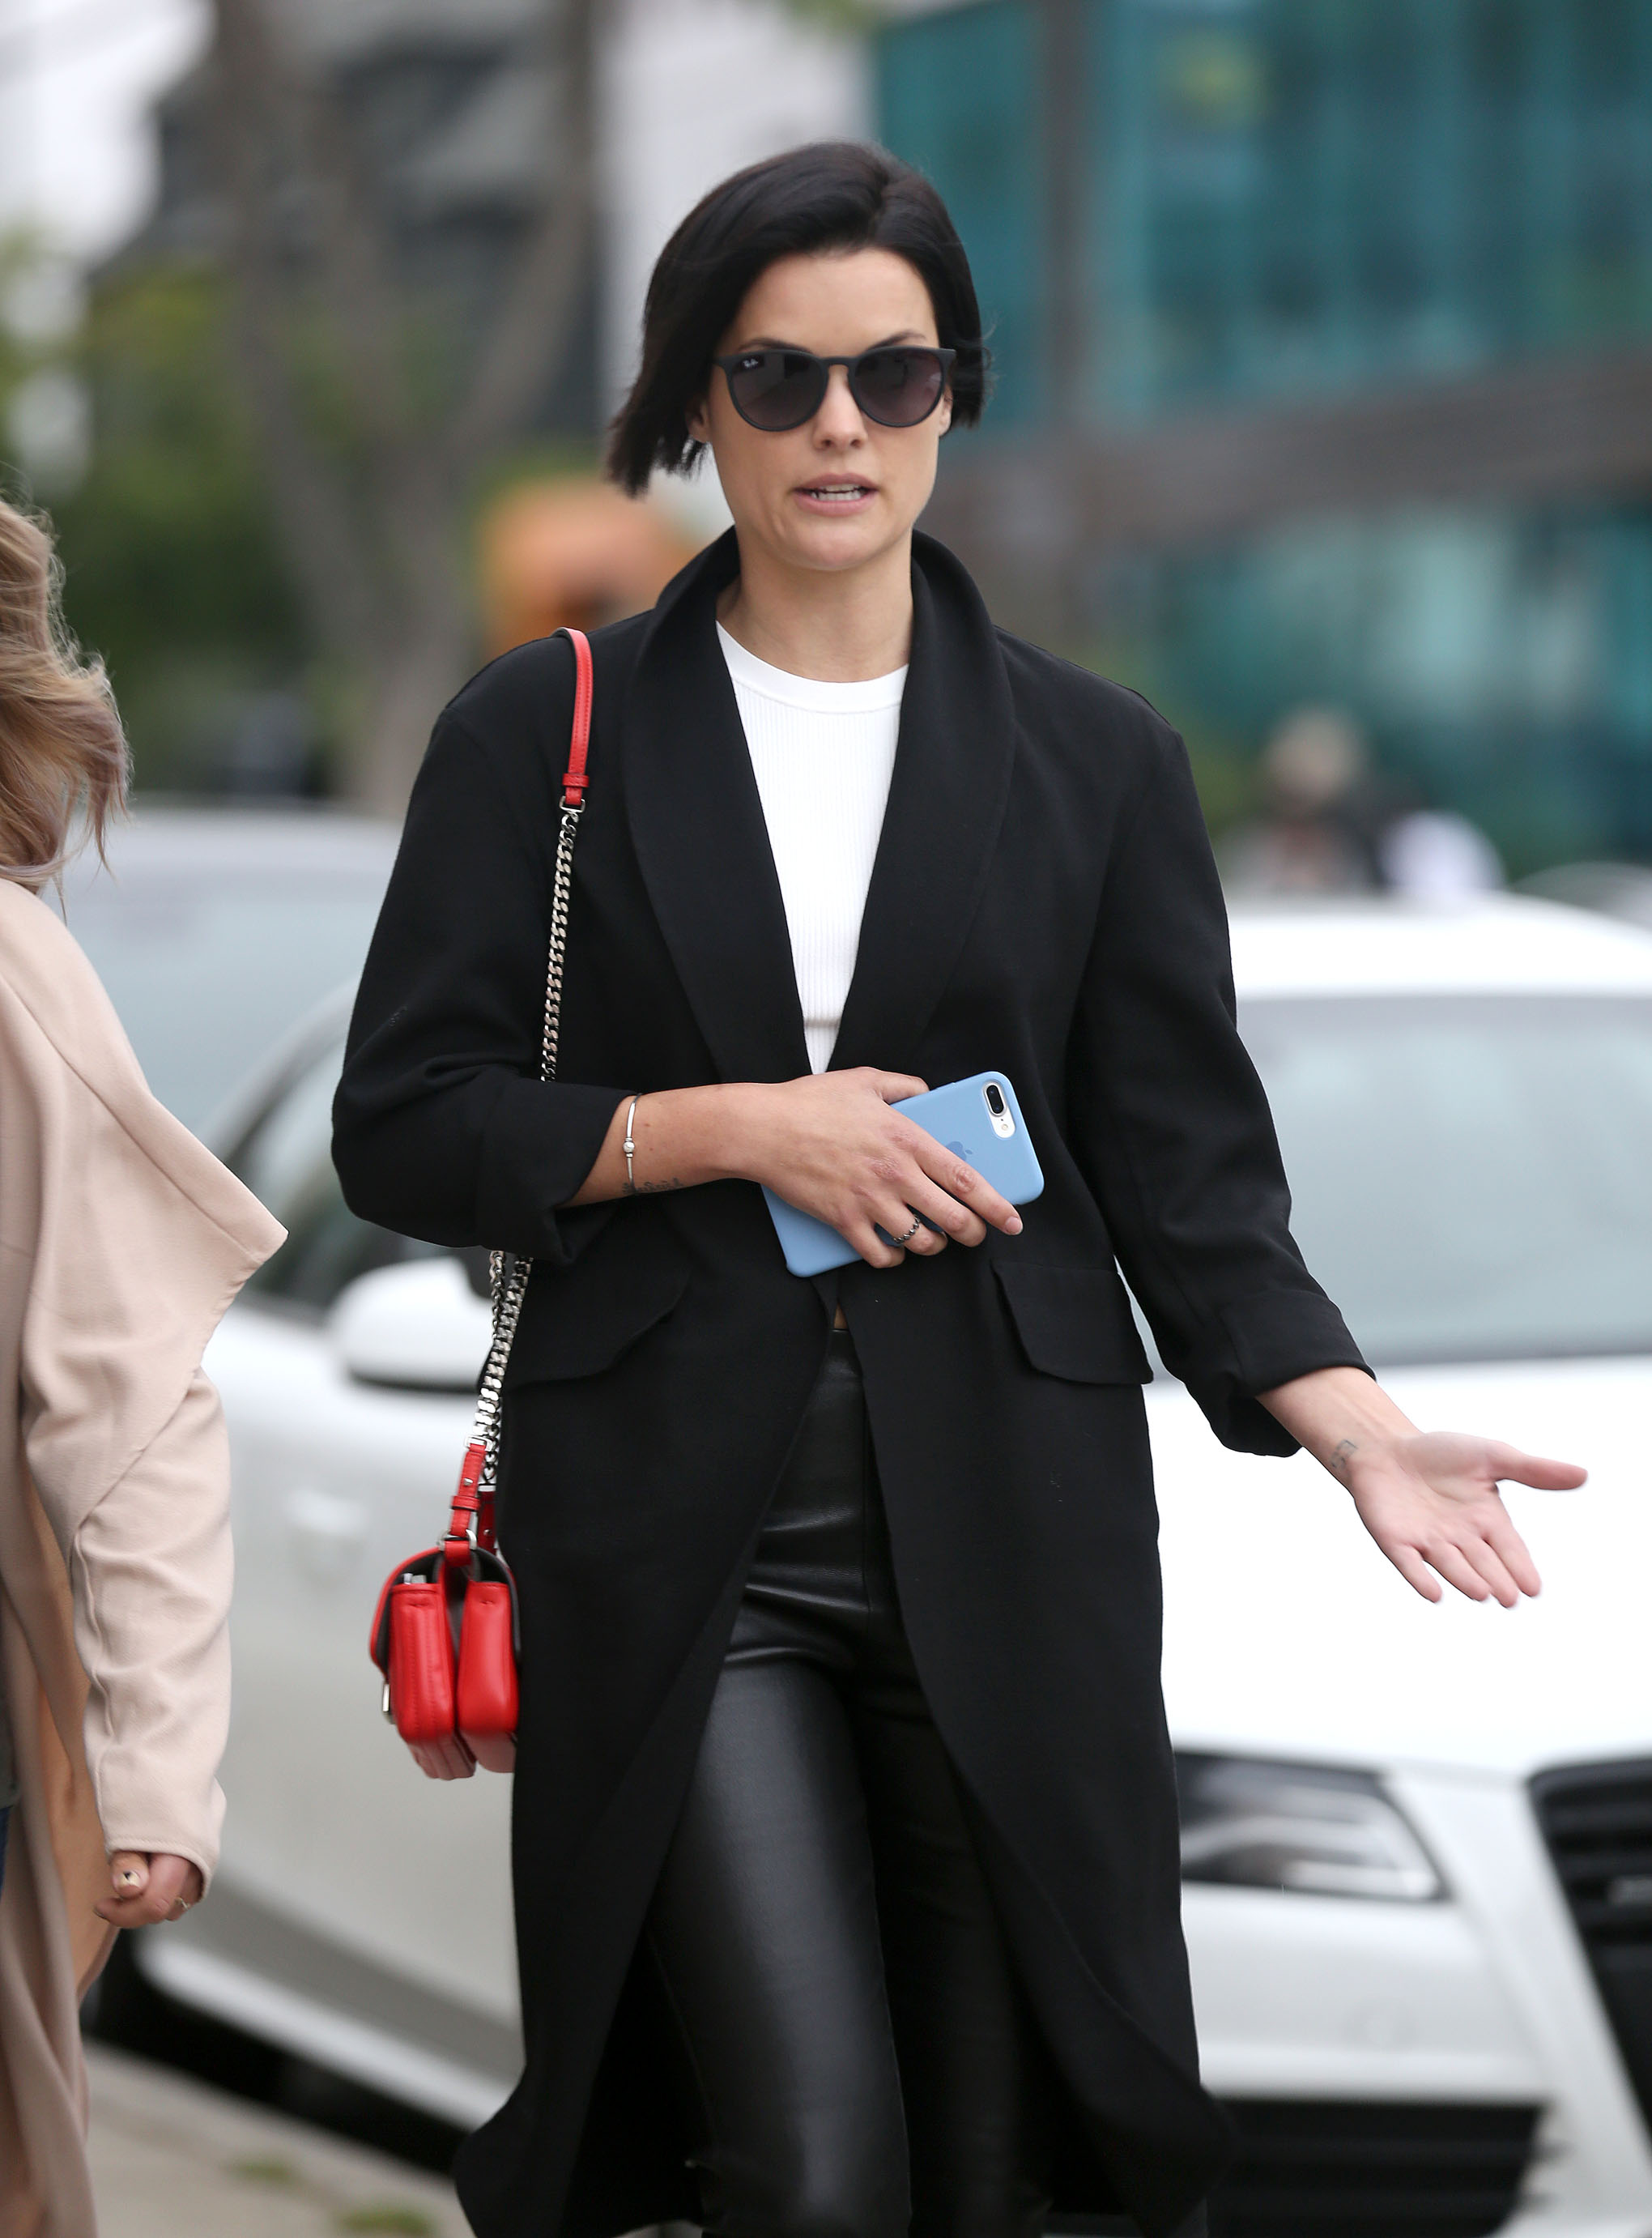 Jaimie Alexander out and about in West Hollywood